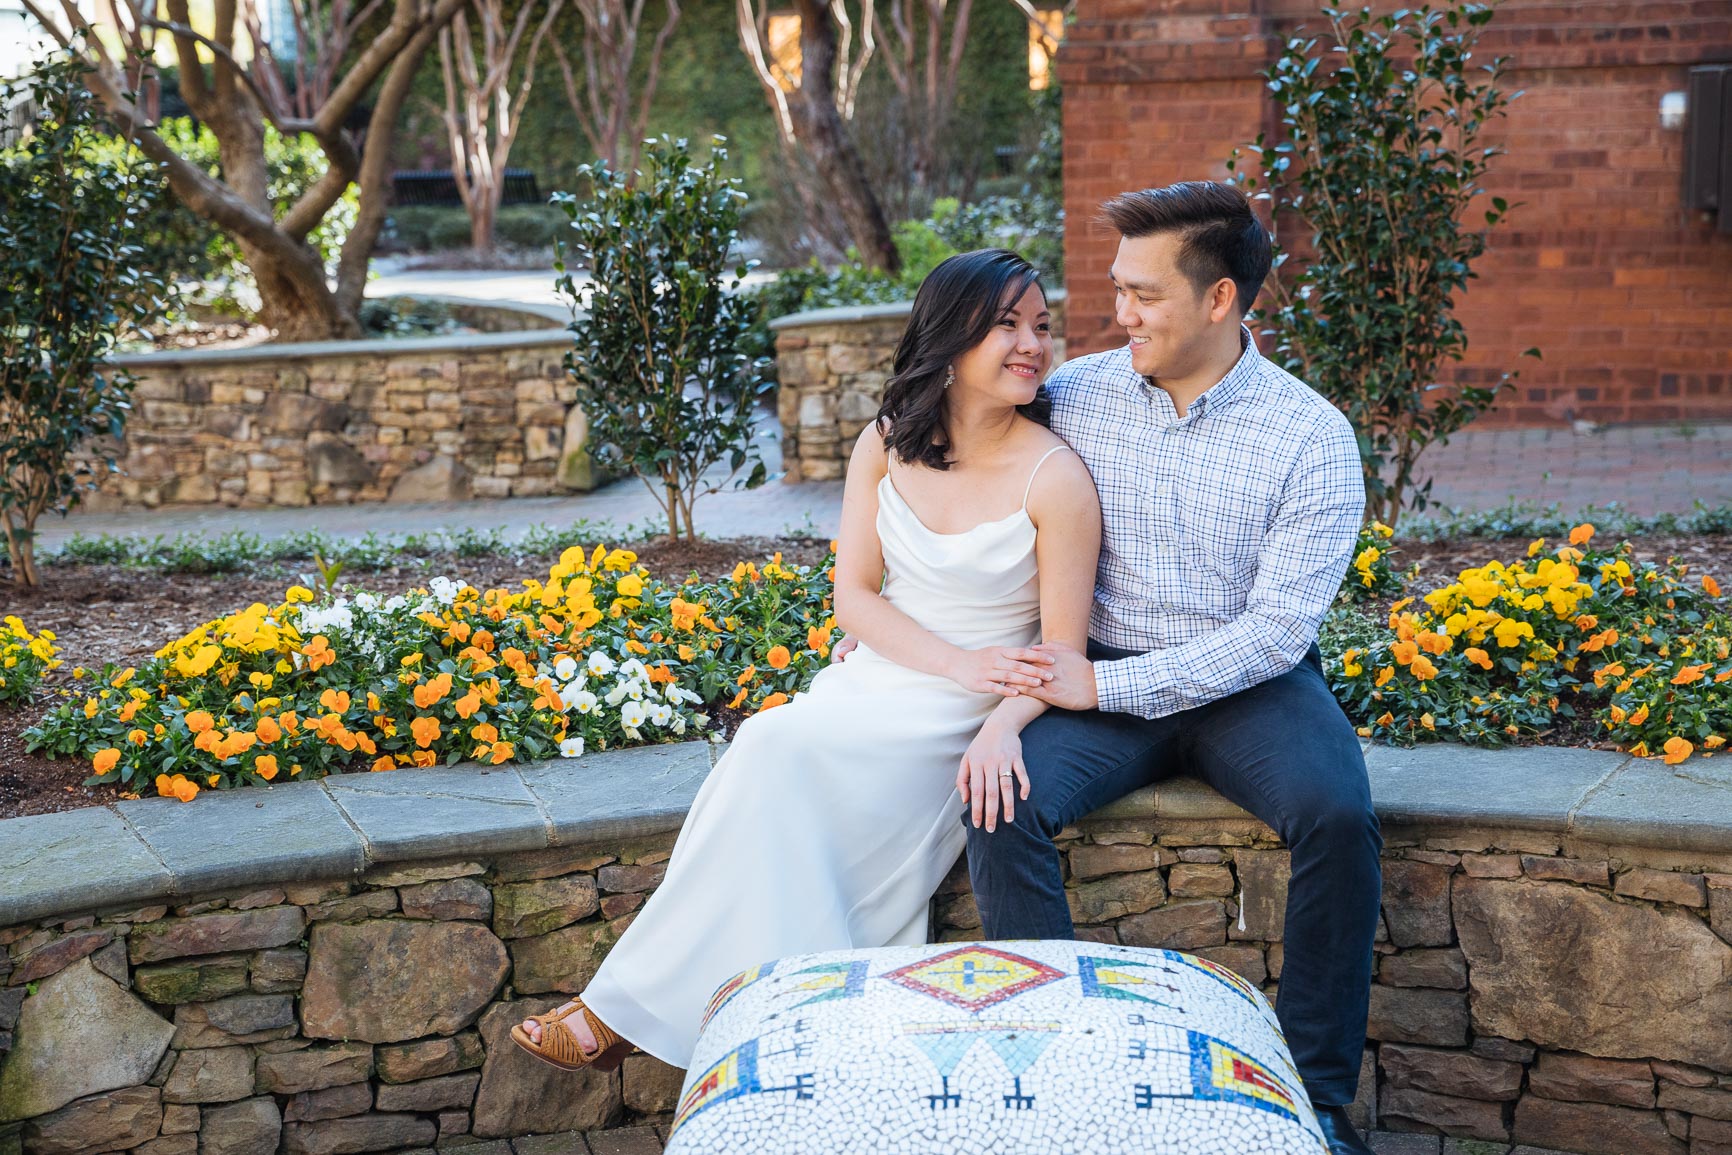 Uptown Charlotte engagement session at The Green photographed by nhieu tang photography | nhieutang.com